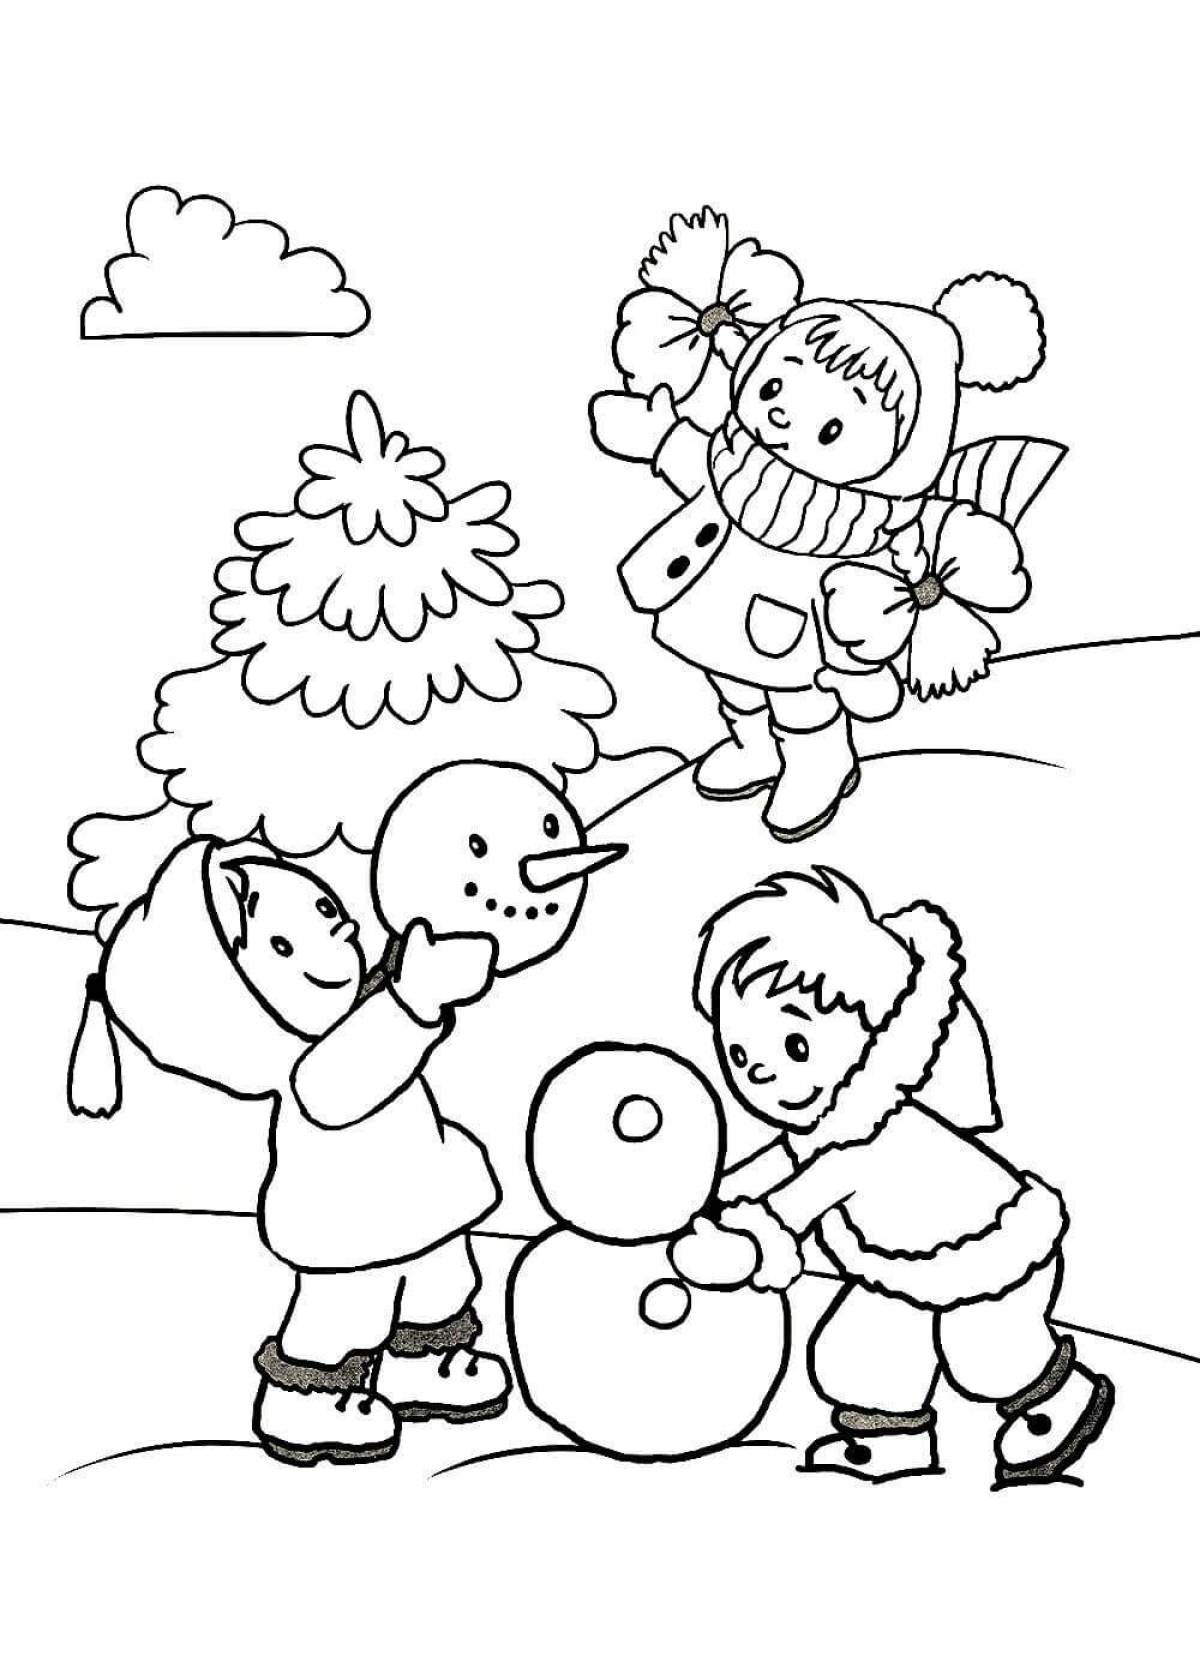 Wonderful winter coloring book for children 6-7 years old